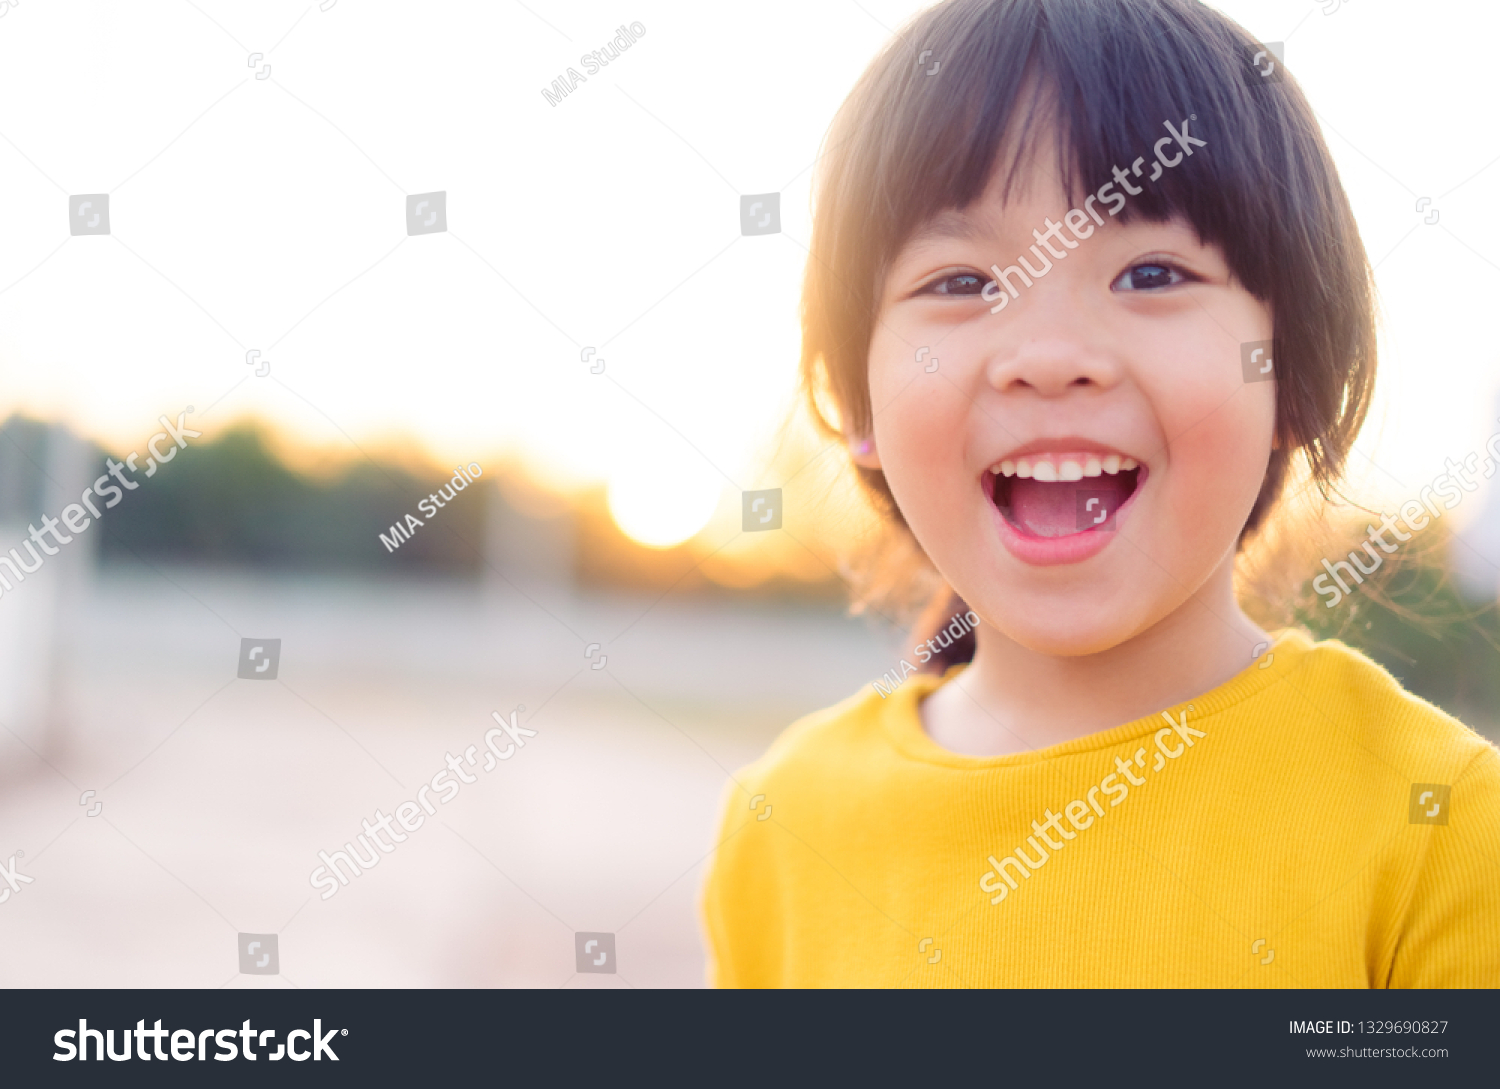 Happy Little asian girl child showing front teeth with big smile and laughing: Healthy happy funny smiling face young adorable lovely female kid.Joyful portrait of asian elementary school student.  #1329690827